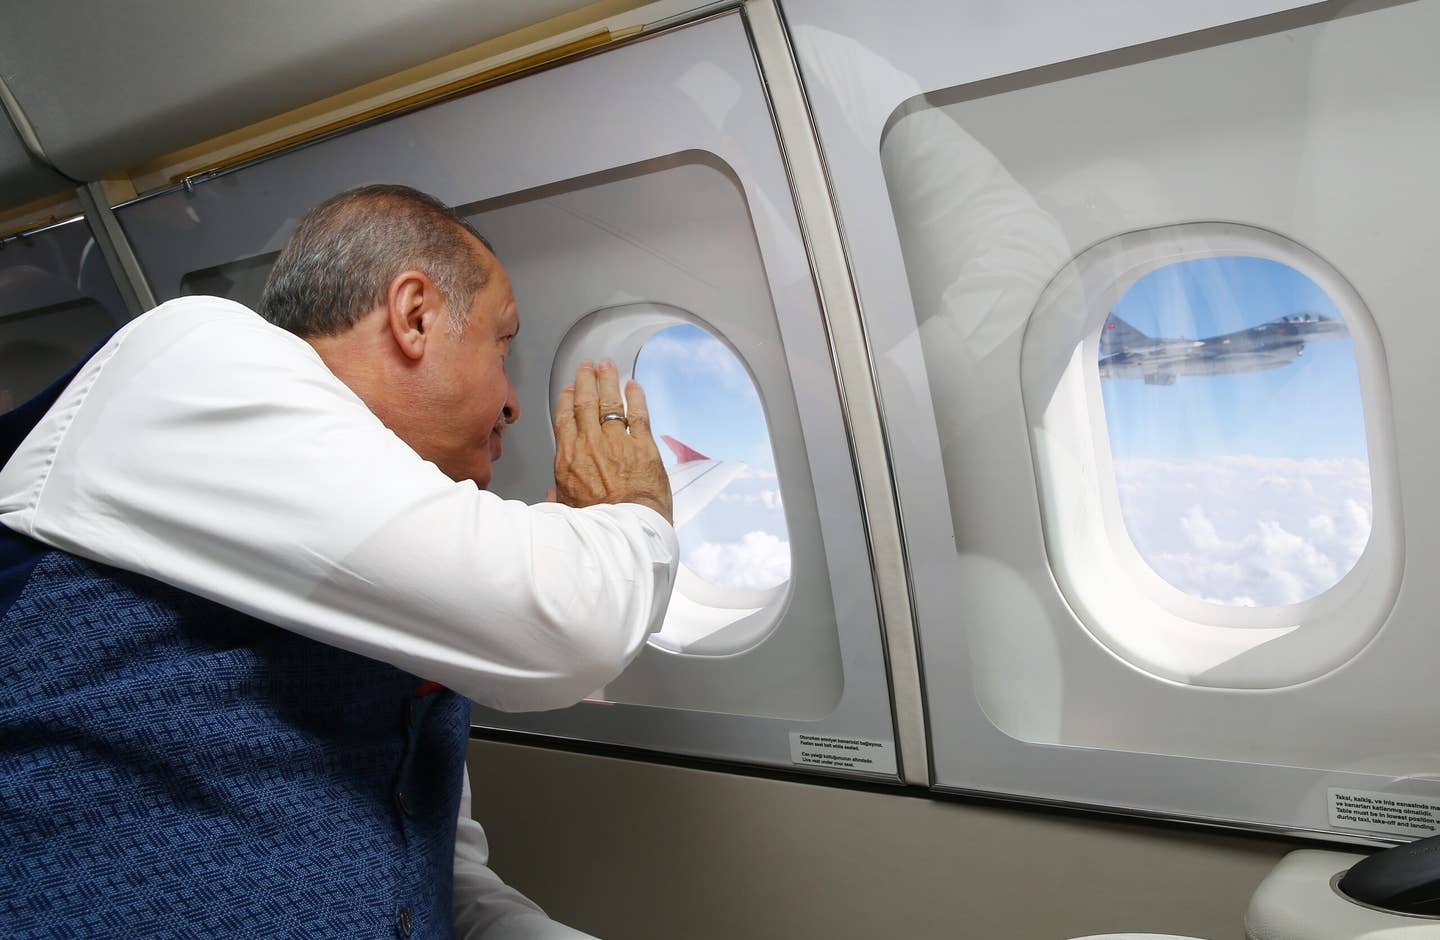 President of Turkey Recep Tayyip Erdogan greets an F-16 during his air travel to attend events of the first anniversary of the July 15 defeated coup attempt in Istanbul, in Ankara, Turkey, on July 15, 2017. <em>Photo by Kayhan Ozer/Anadolu Agency/Getty Images</em>